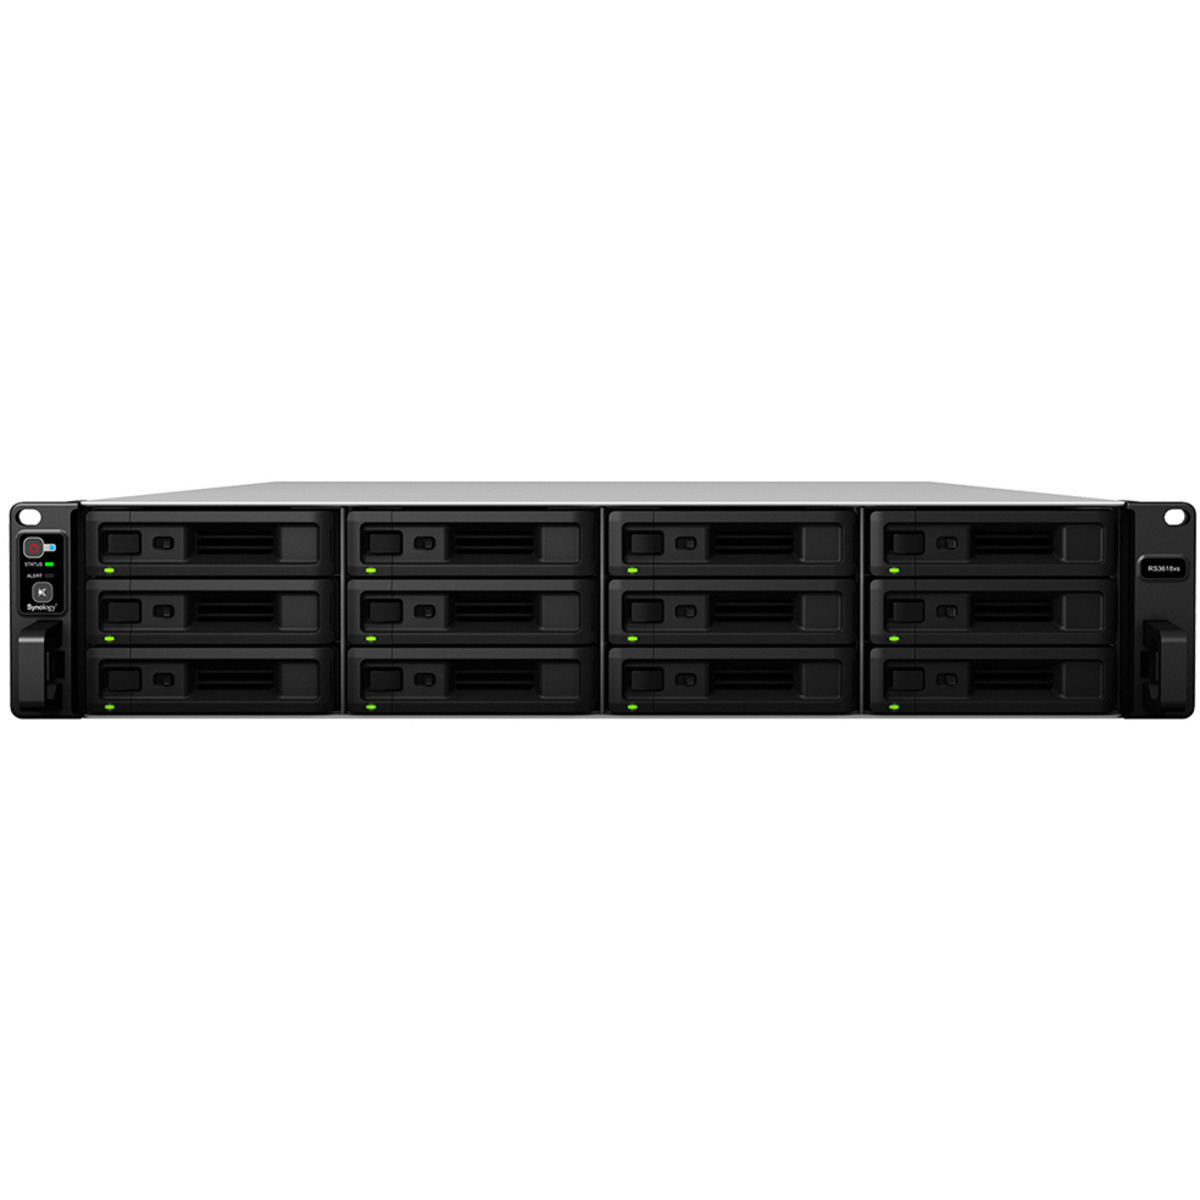 Synology RackStation RS3618xs 32tb 12-Bay RackMount Large Business / Enterprise NAS - Network Attached Storage Device 8x4tb Seagate IronWolf Pro ST4000NT001 3.5 7200rpm SATA 6Gb/s HDD NAS Class Drives Installed - Burn-In Tested RackStation RS3618xs